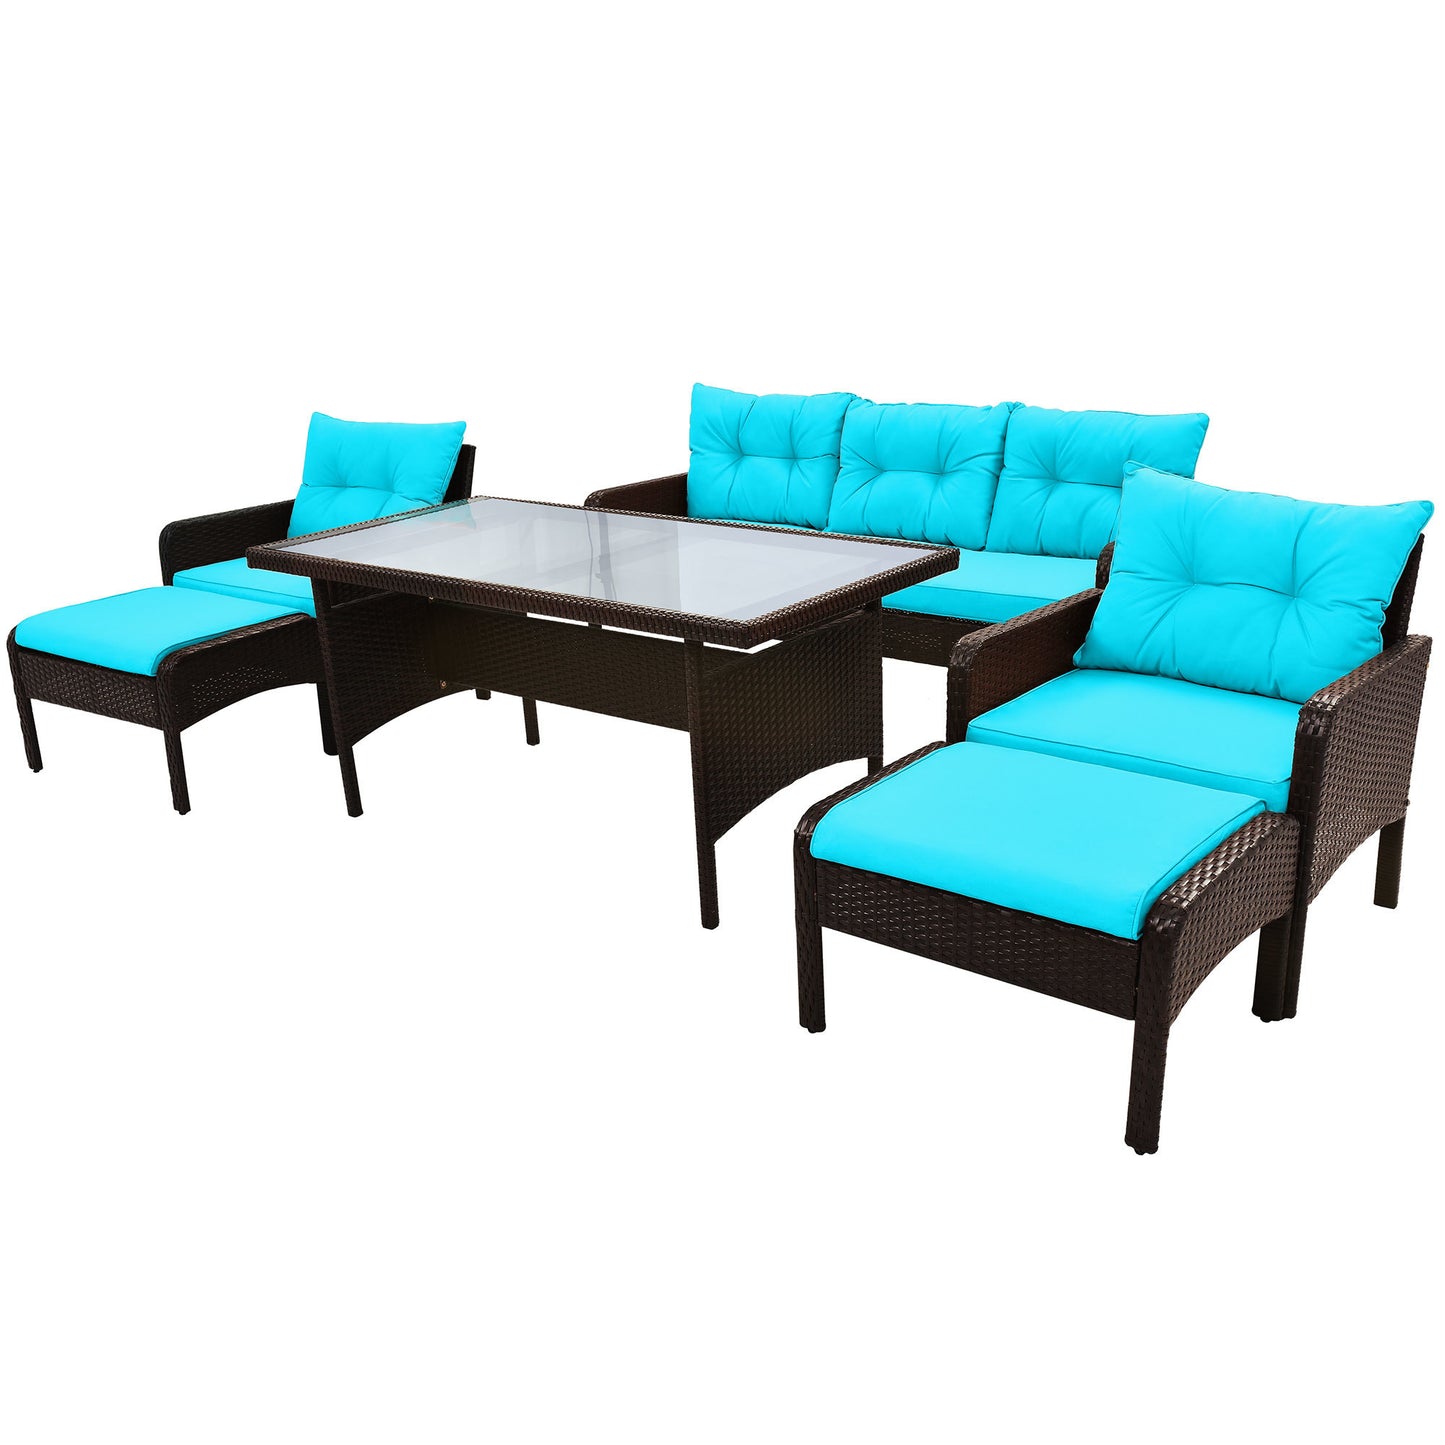 6-Piece Outdoor Wicker Rattan Sofa Set Dining Table Set with Removable Cushions and Tempered Glass Table